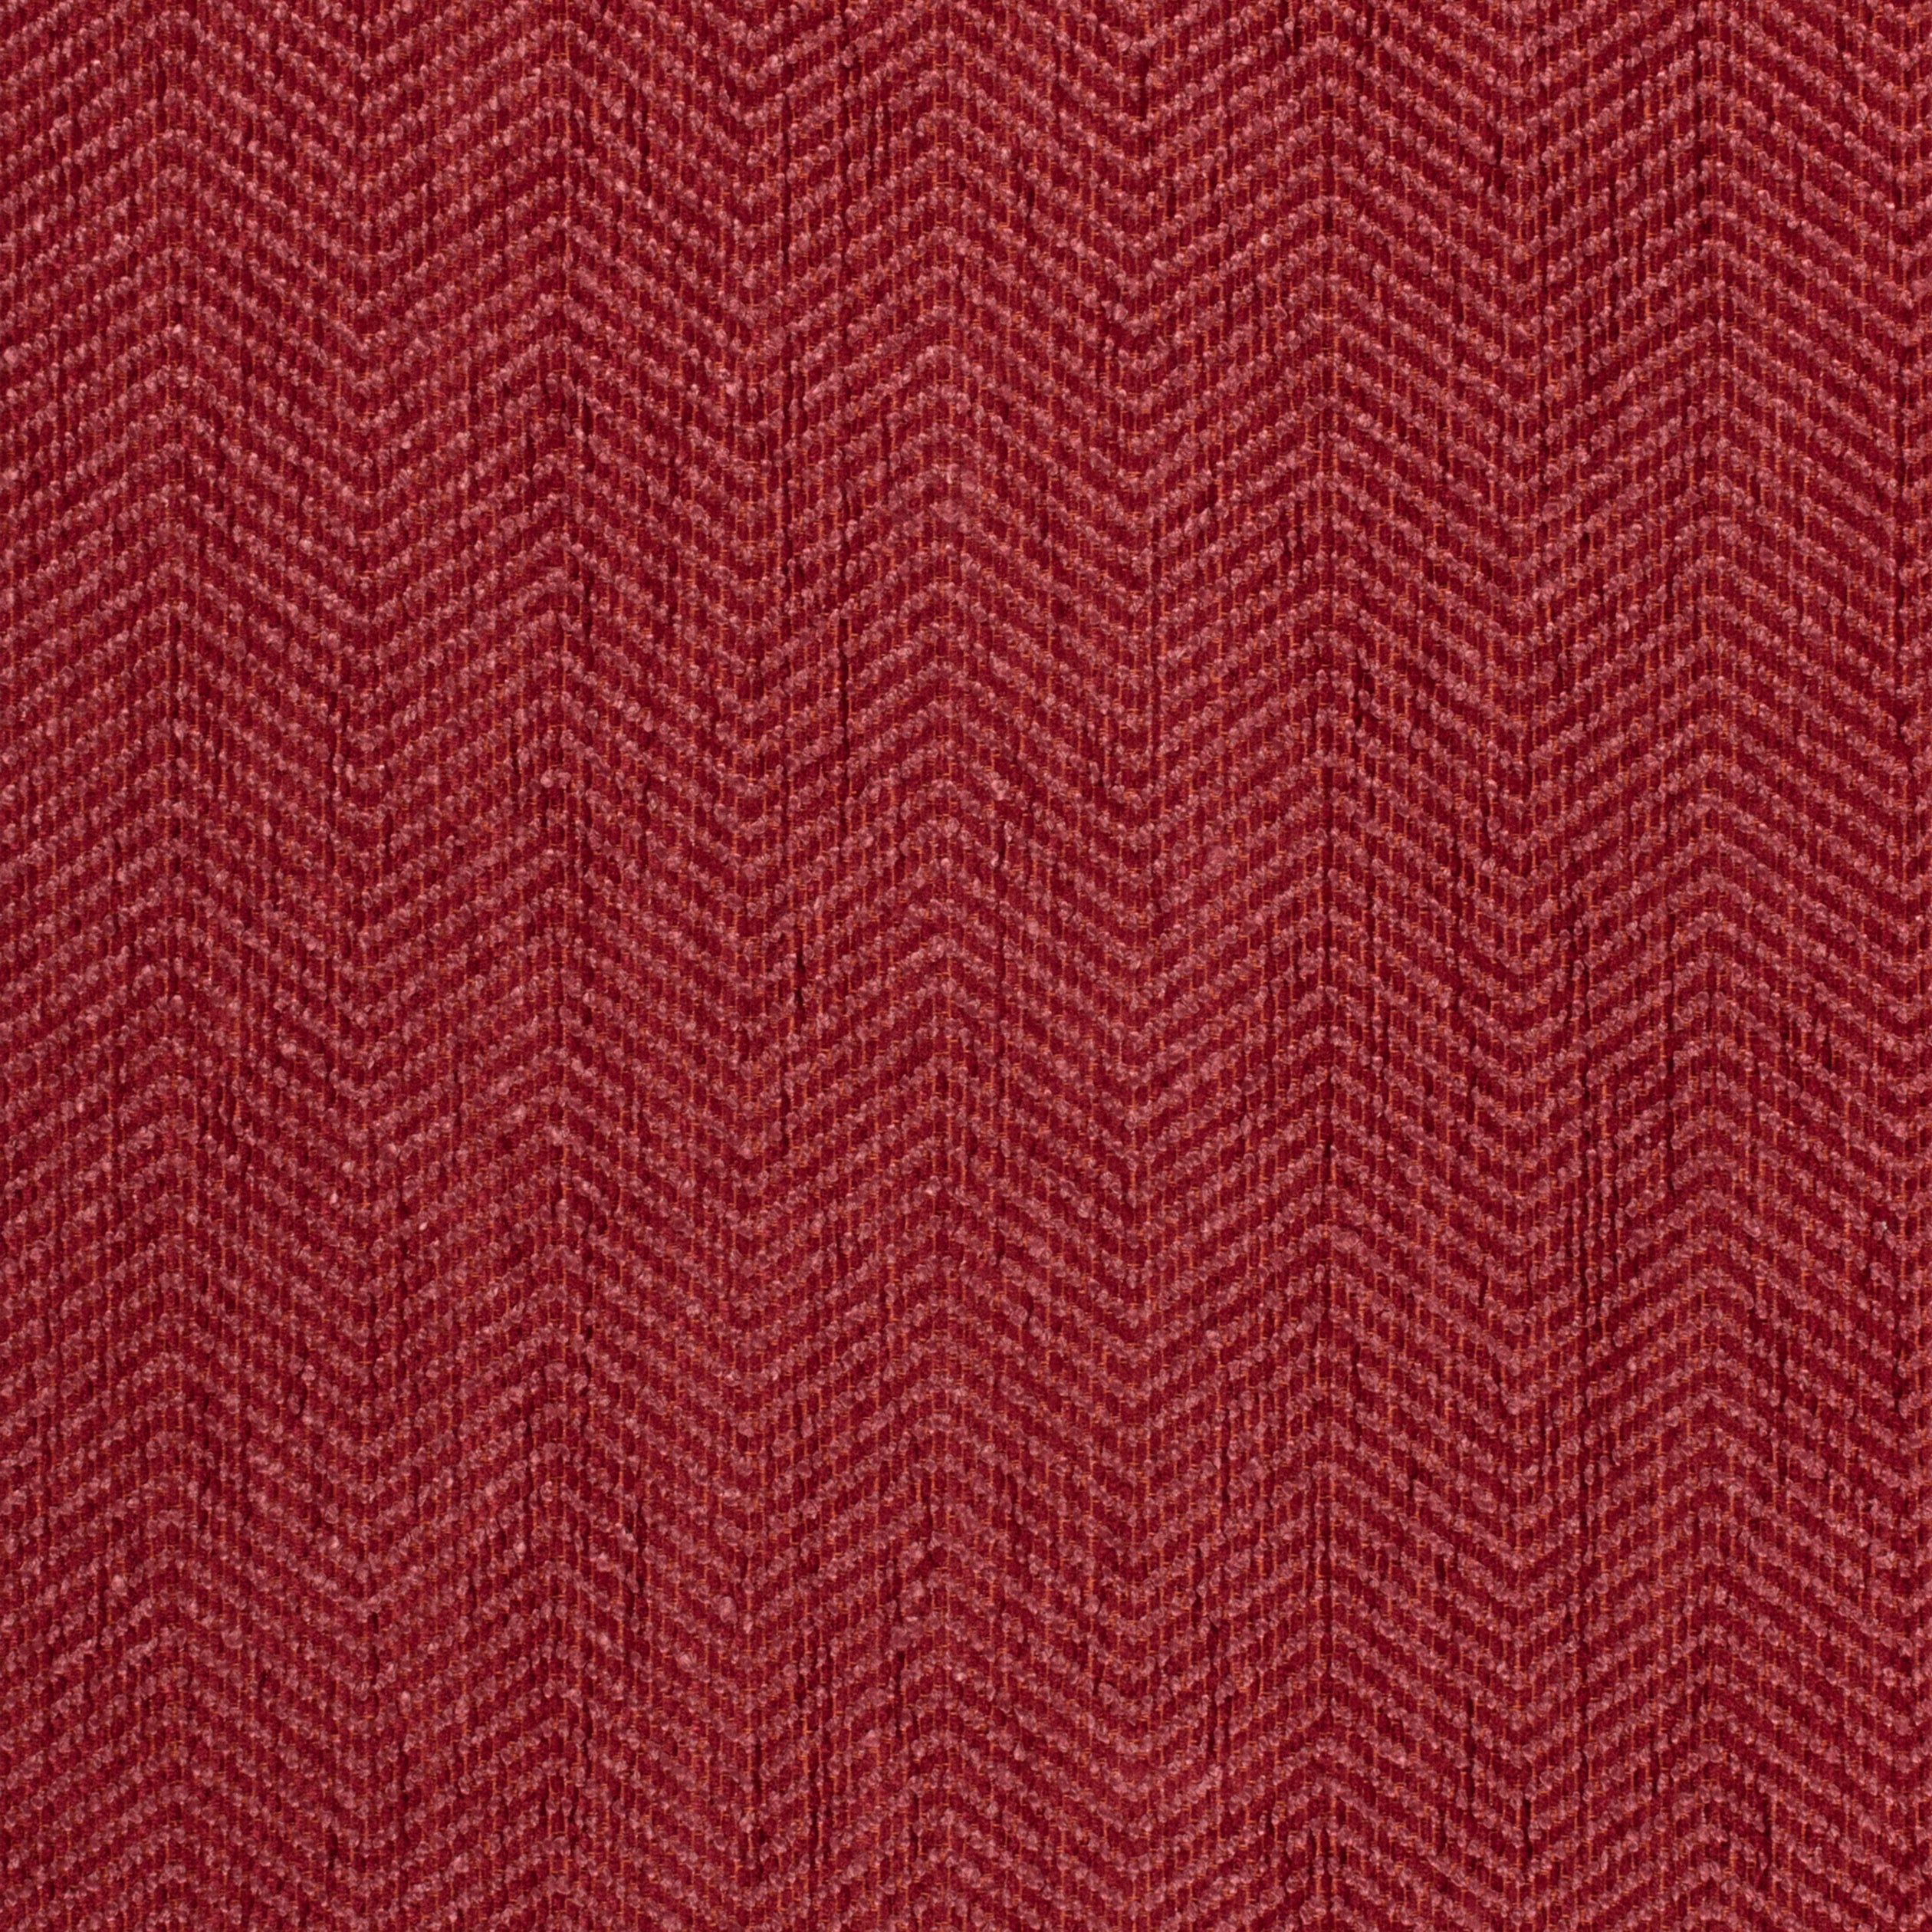 Dalton Herringbone fabric in berry color - pattern number W80627 - by Thibaut in the Pinnacle collection